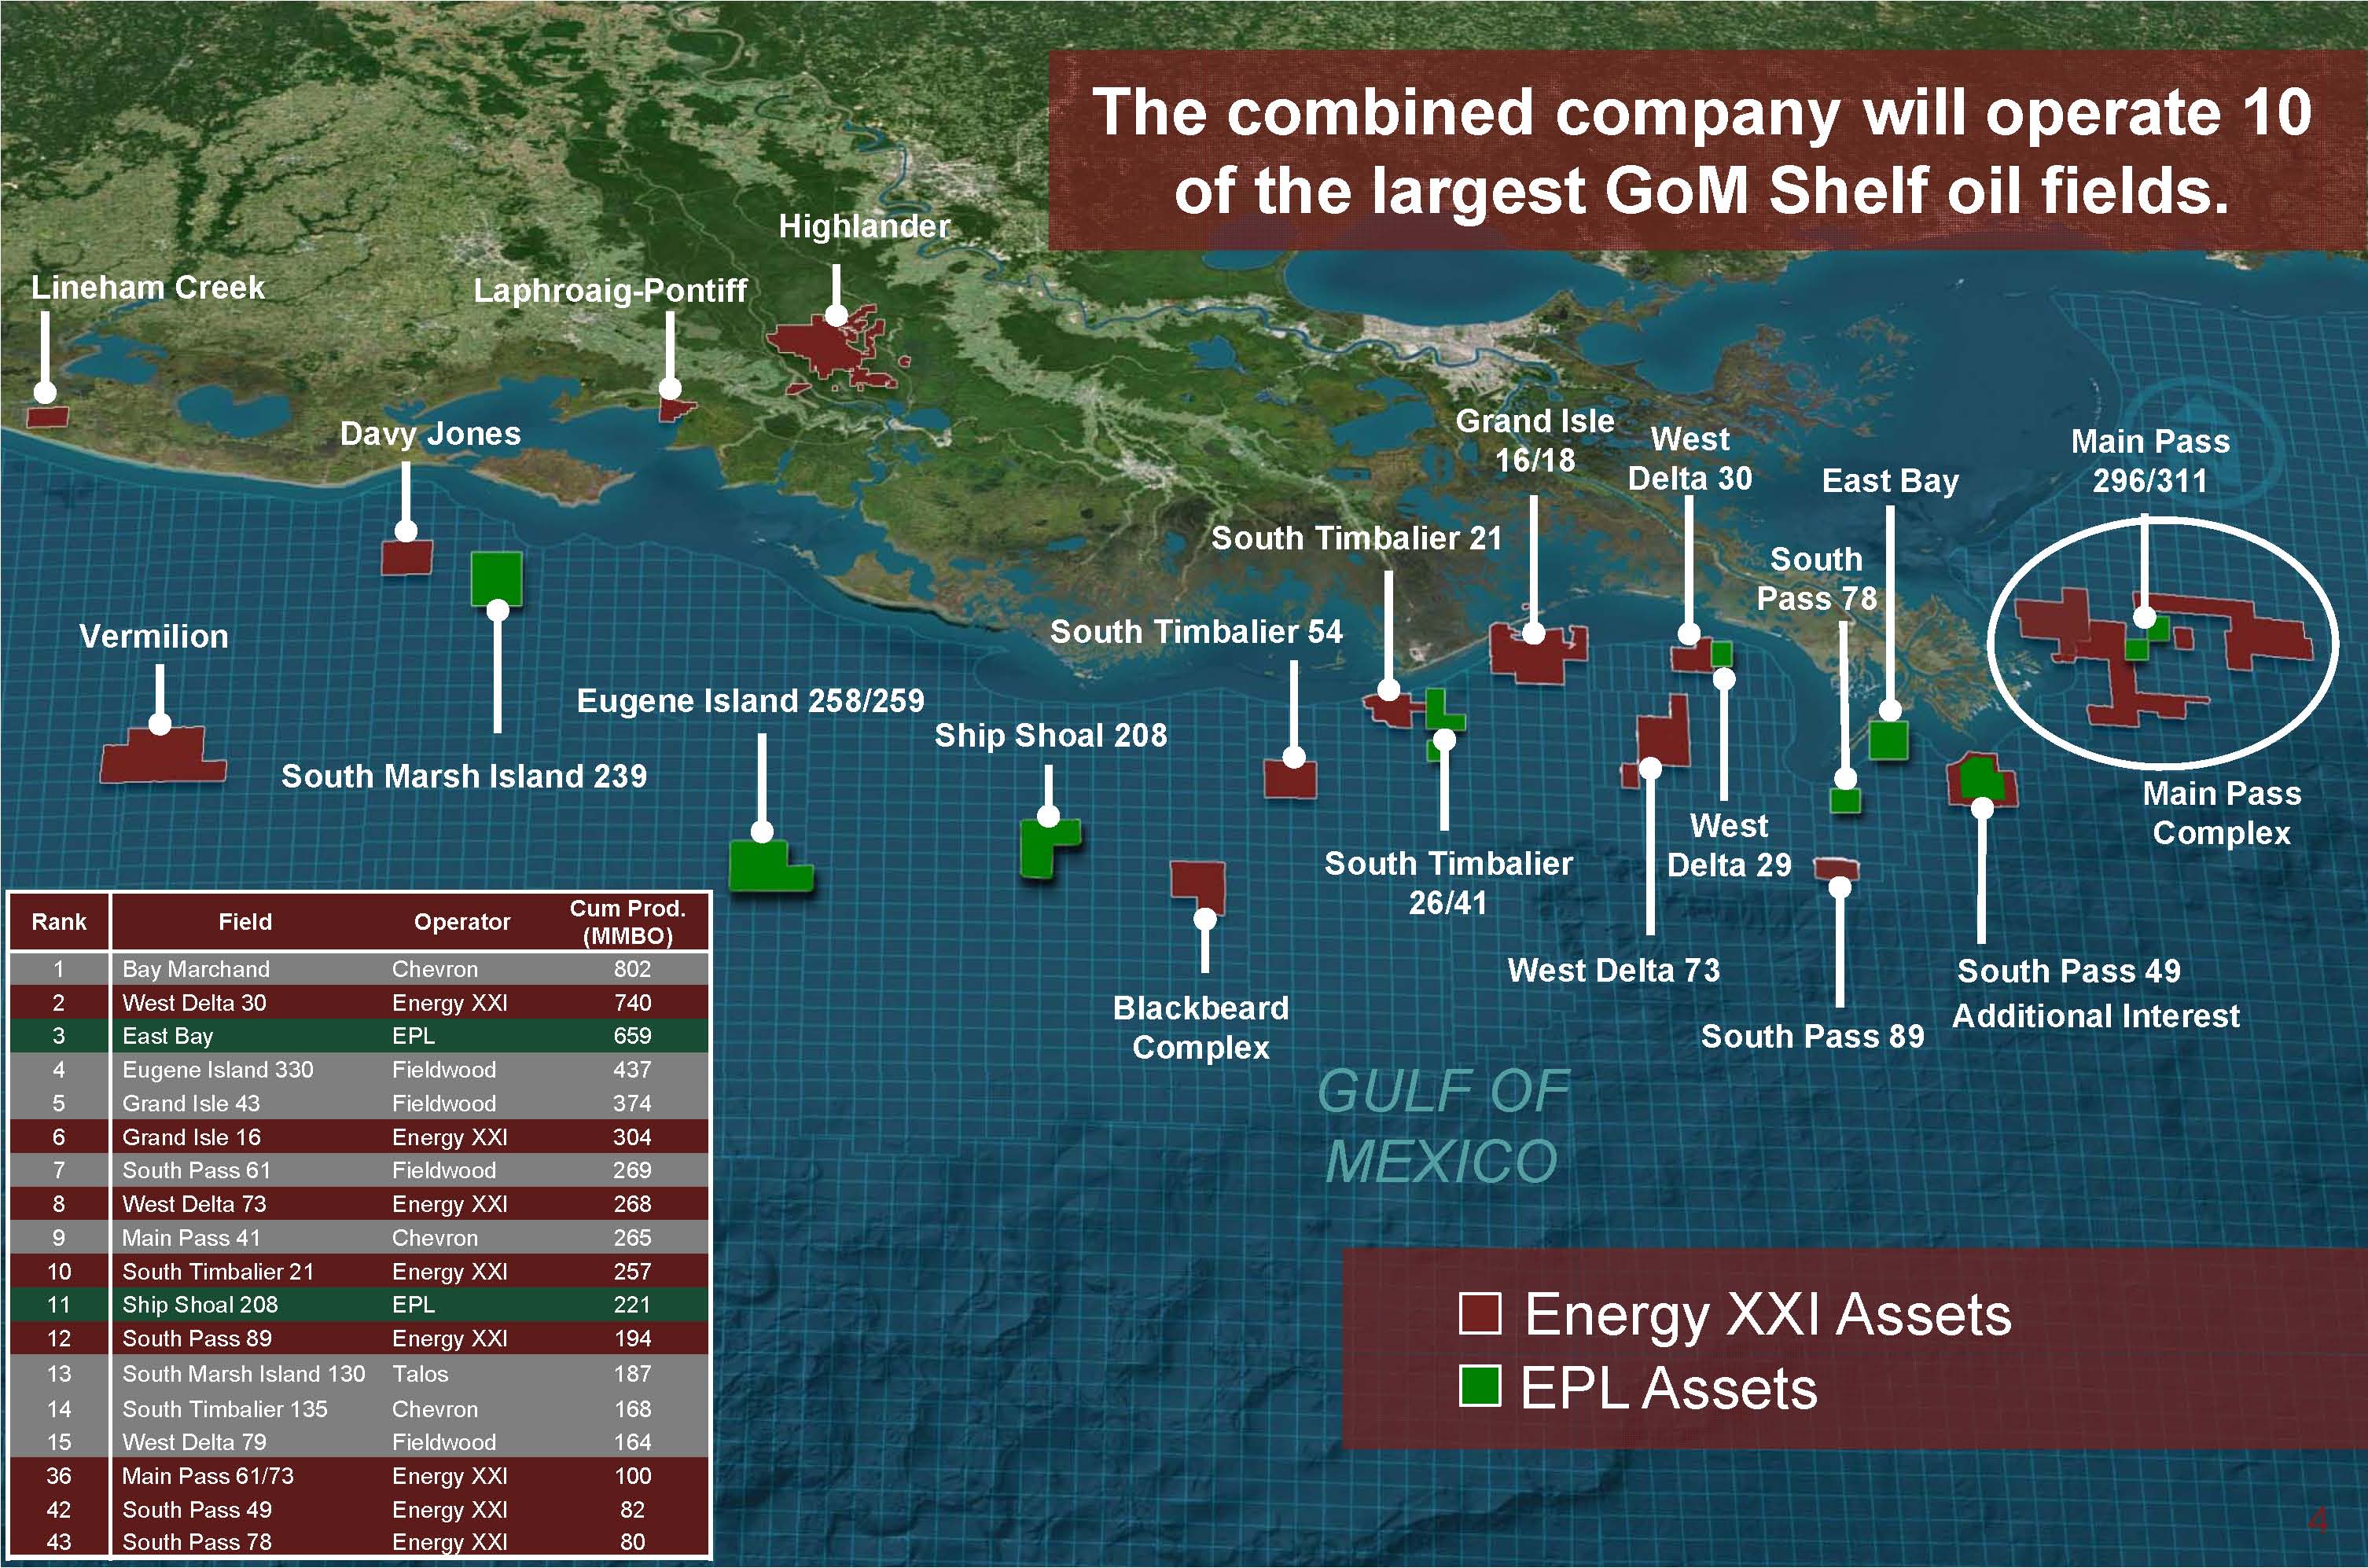 Energy XXI Now the Largest Independent Operating on the GOM Shelf with $2.3B ...